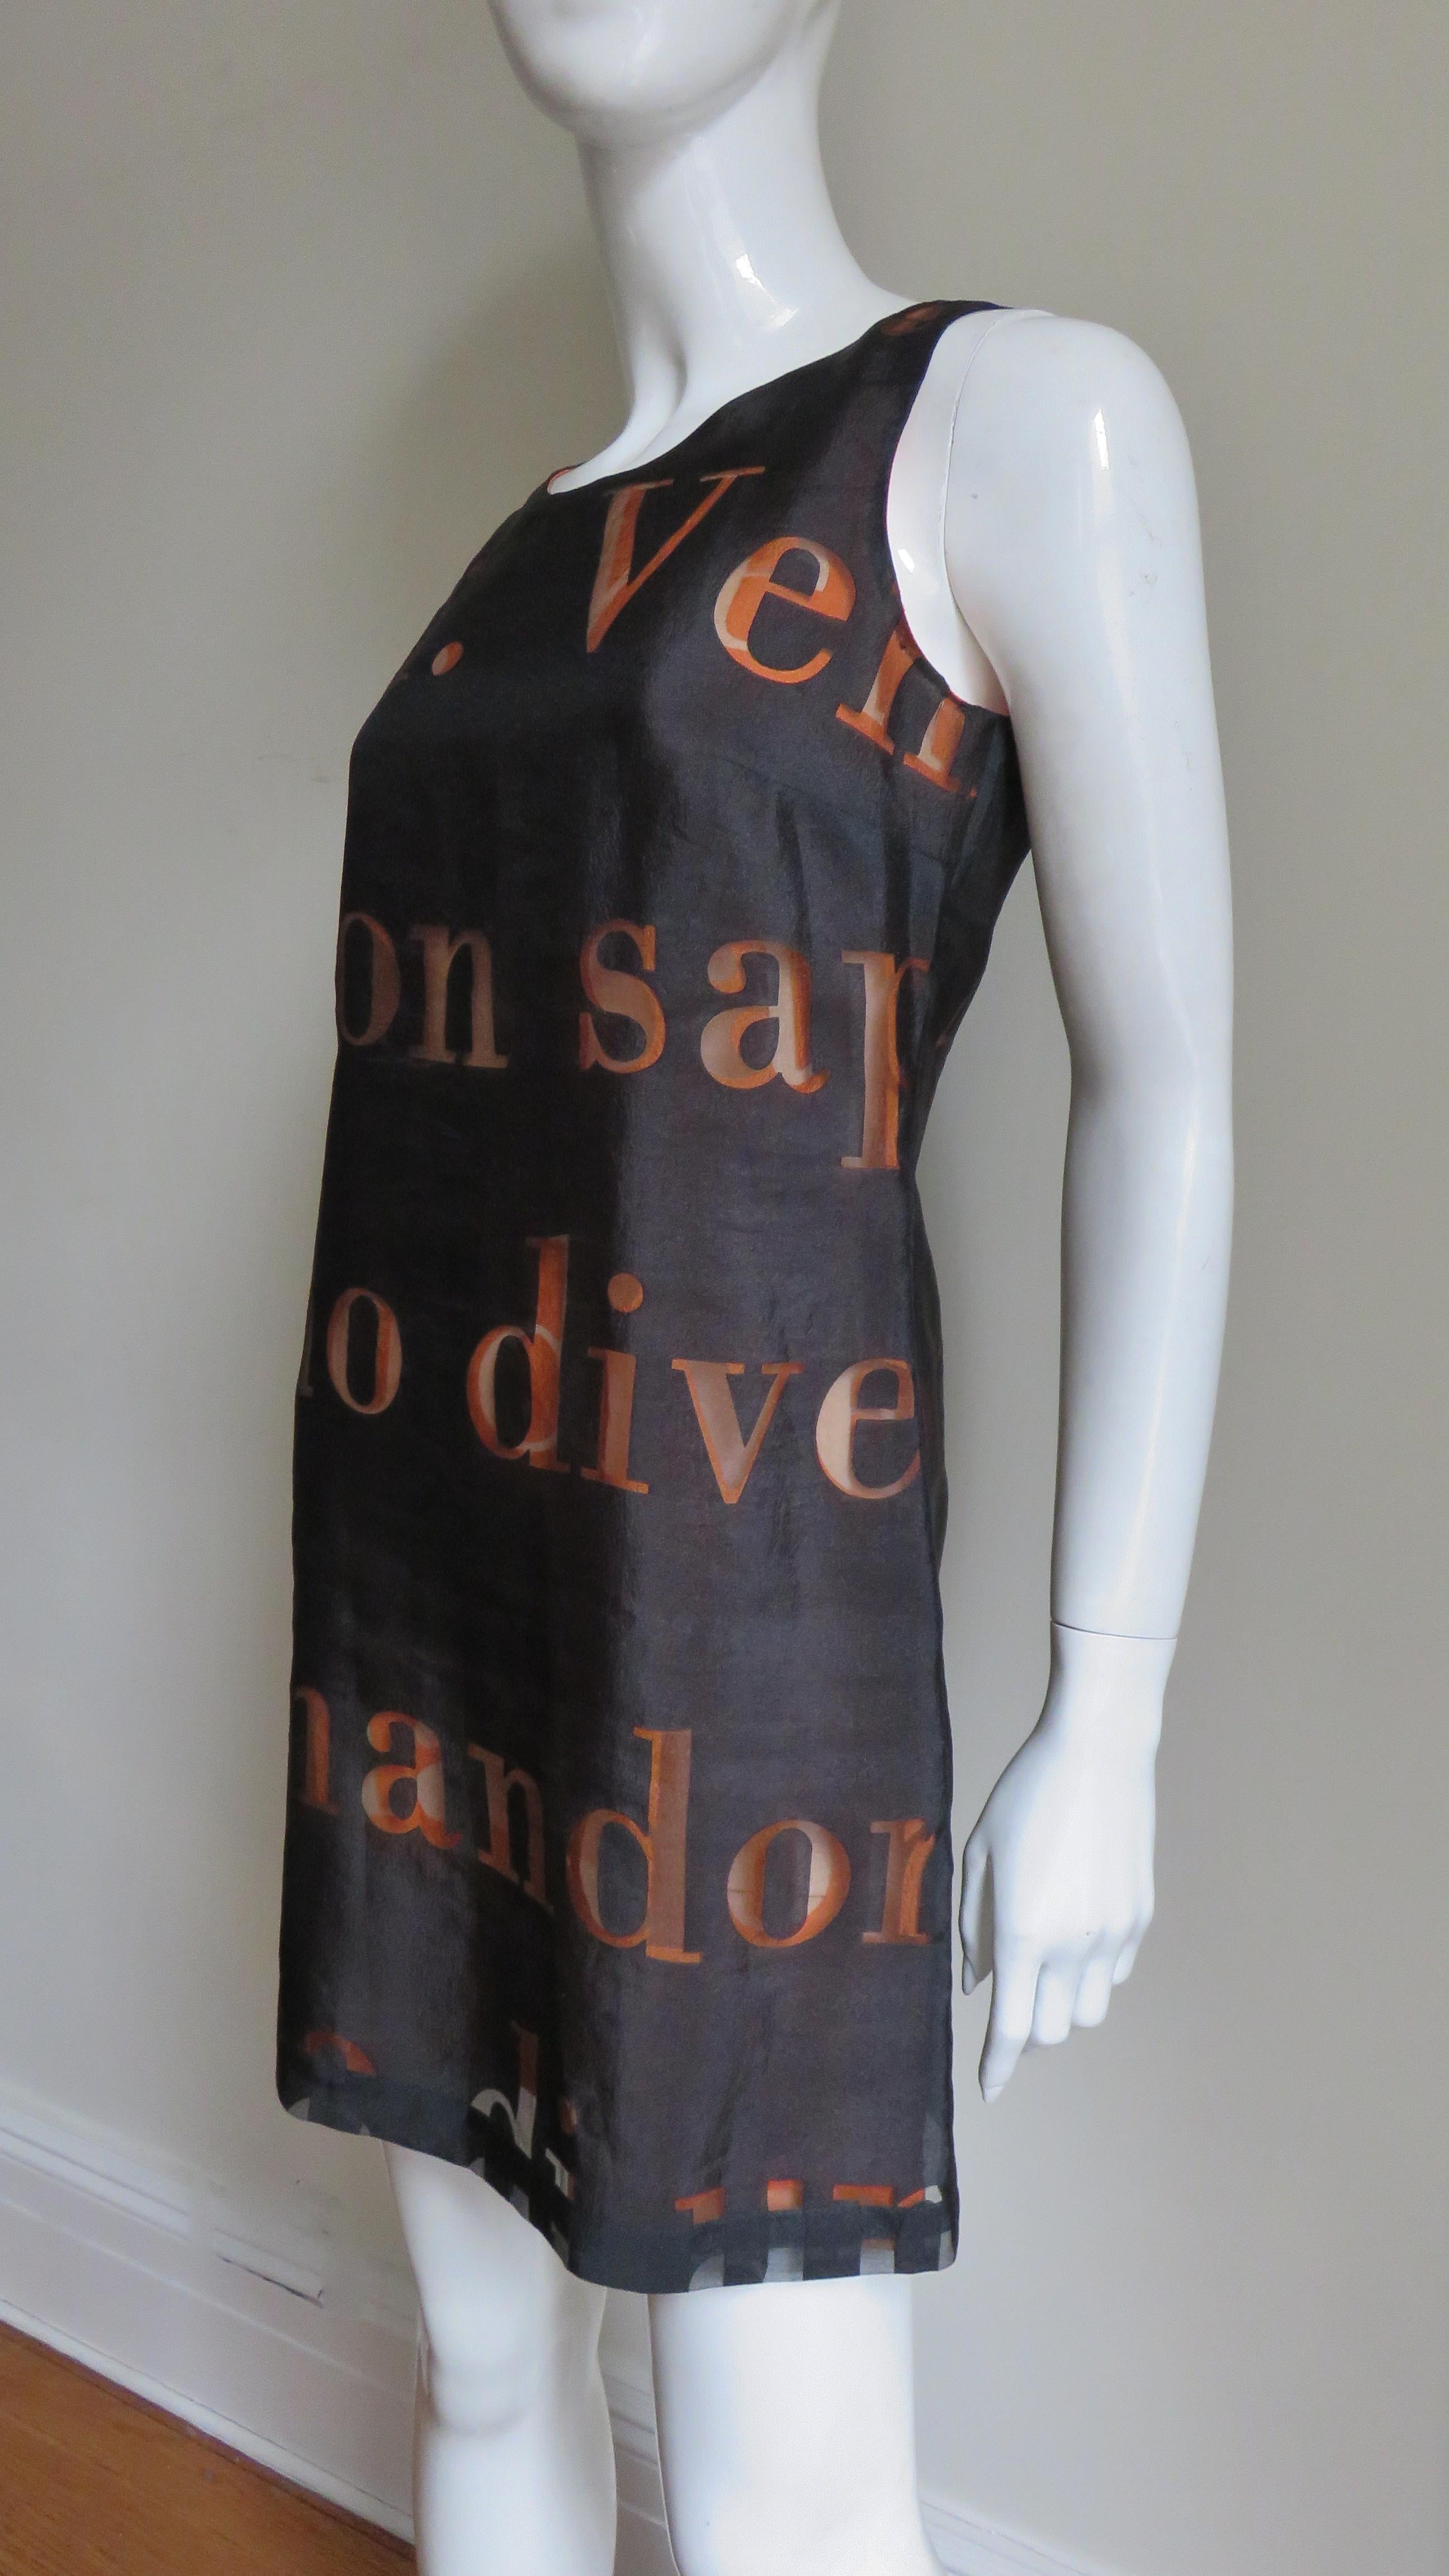 A fabulous semi sheer black dress lined in orange with a letter pattern from Moschino.   It is a sleeveless semi fitted A line dress with a scoop neckline.  The dress is lined in orange and has a back zipper.
Fits sizes Small, Medium. US size